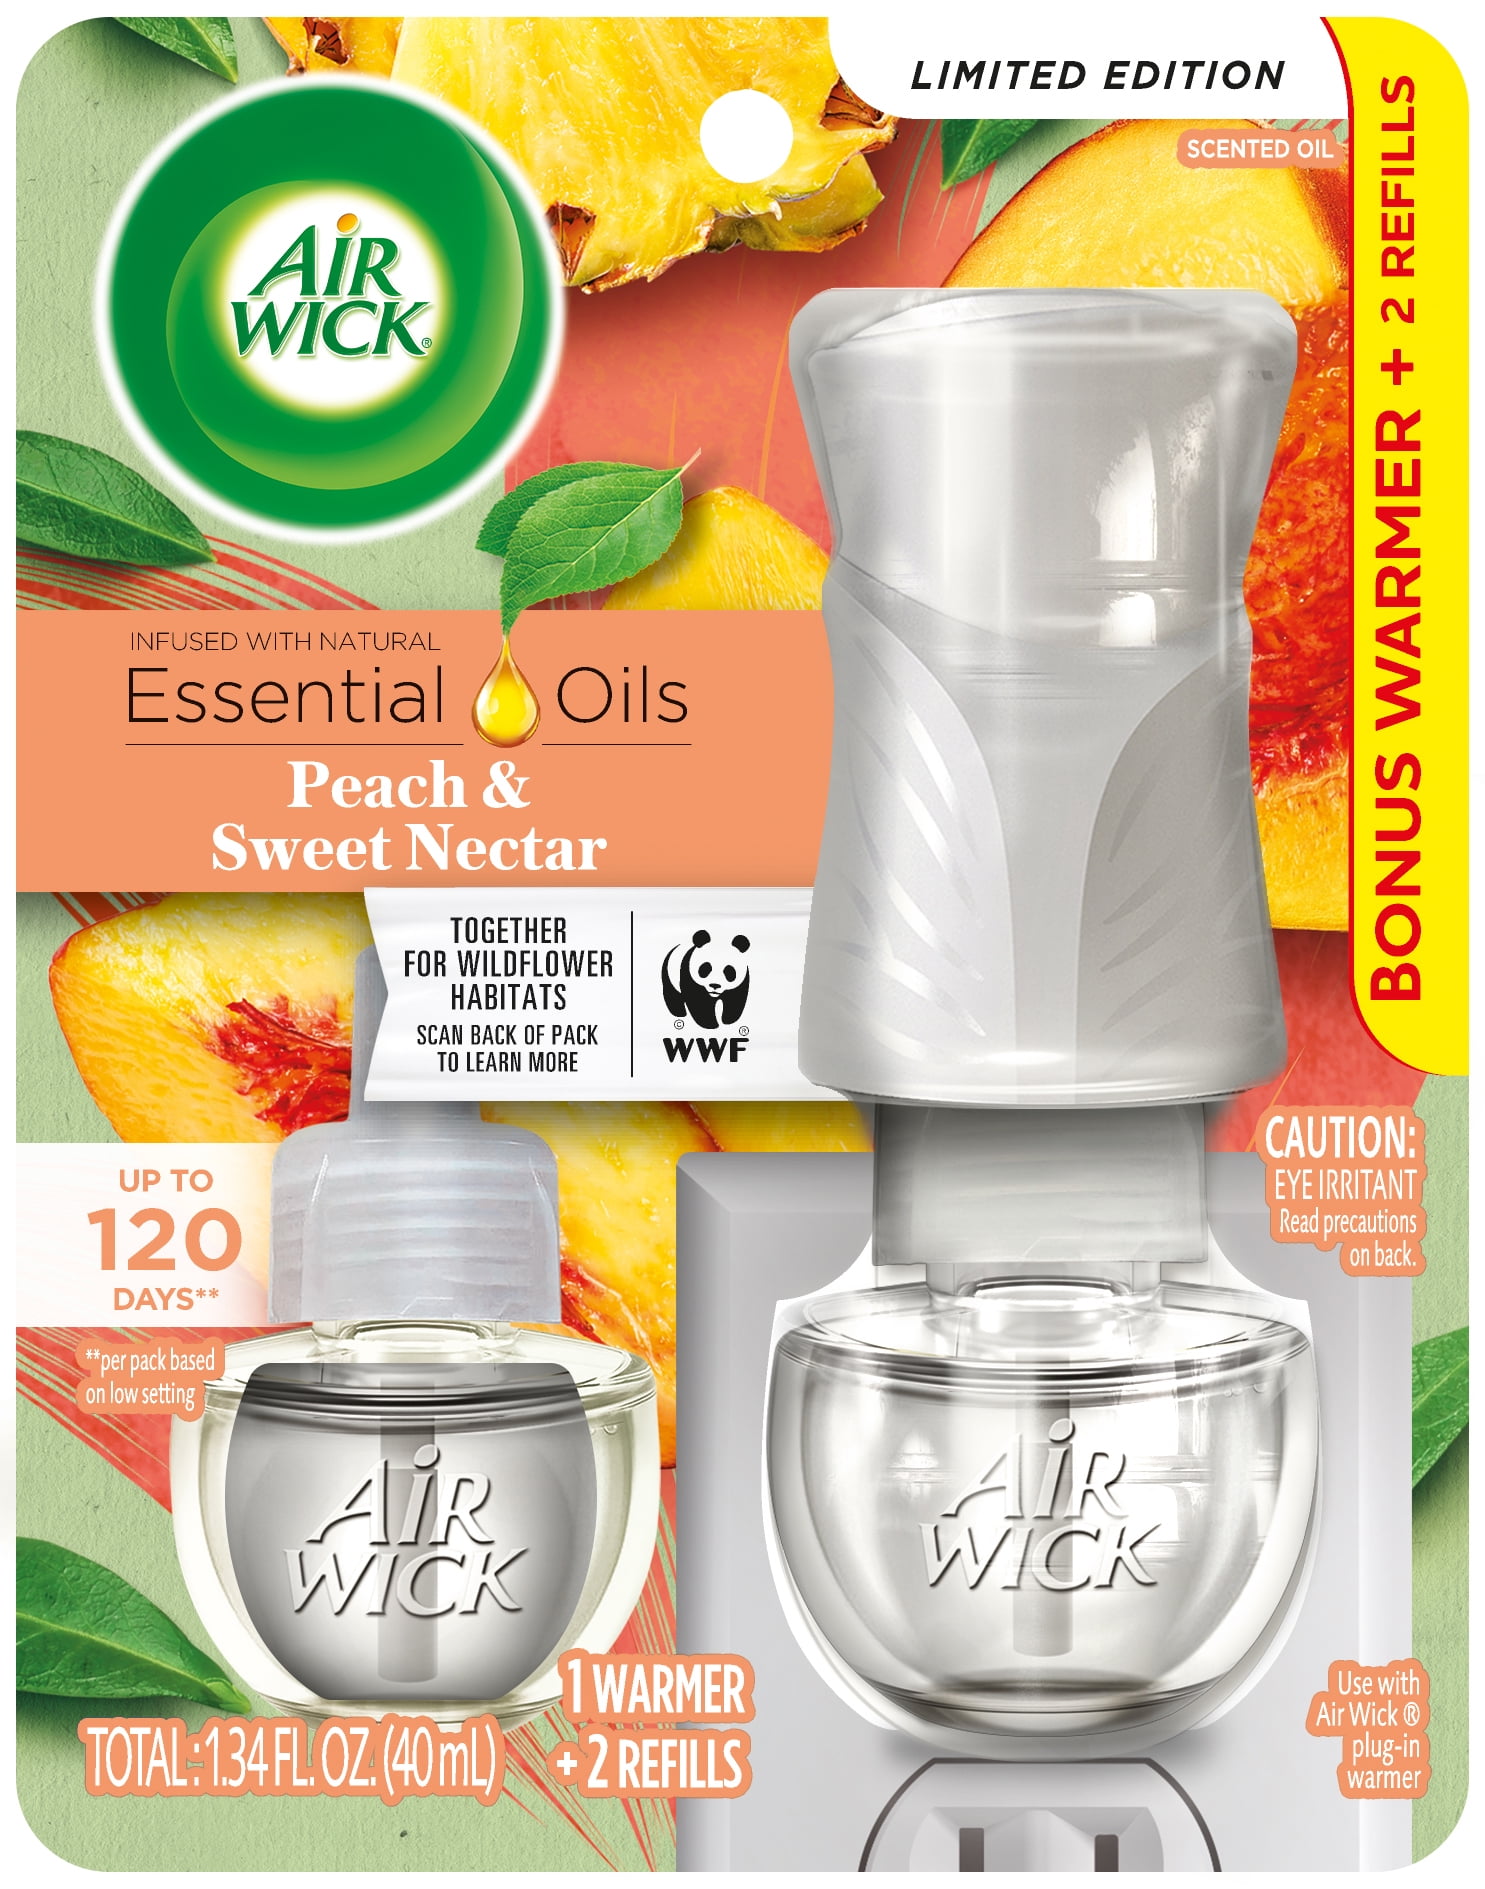 Air Wick Plug in Scented Oil Starter Kit (Warmer + 2 Refills), Peach & Sweet Nectar, Air Freshener, Essential Oils, Spring Collection